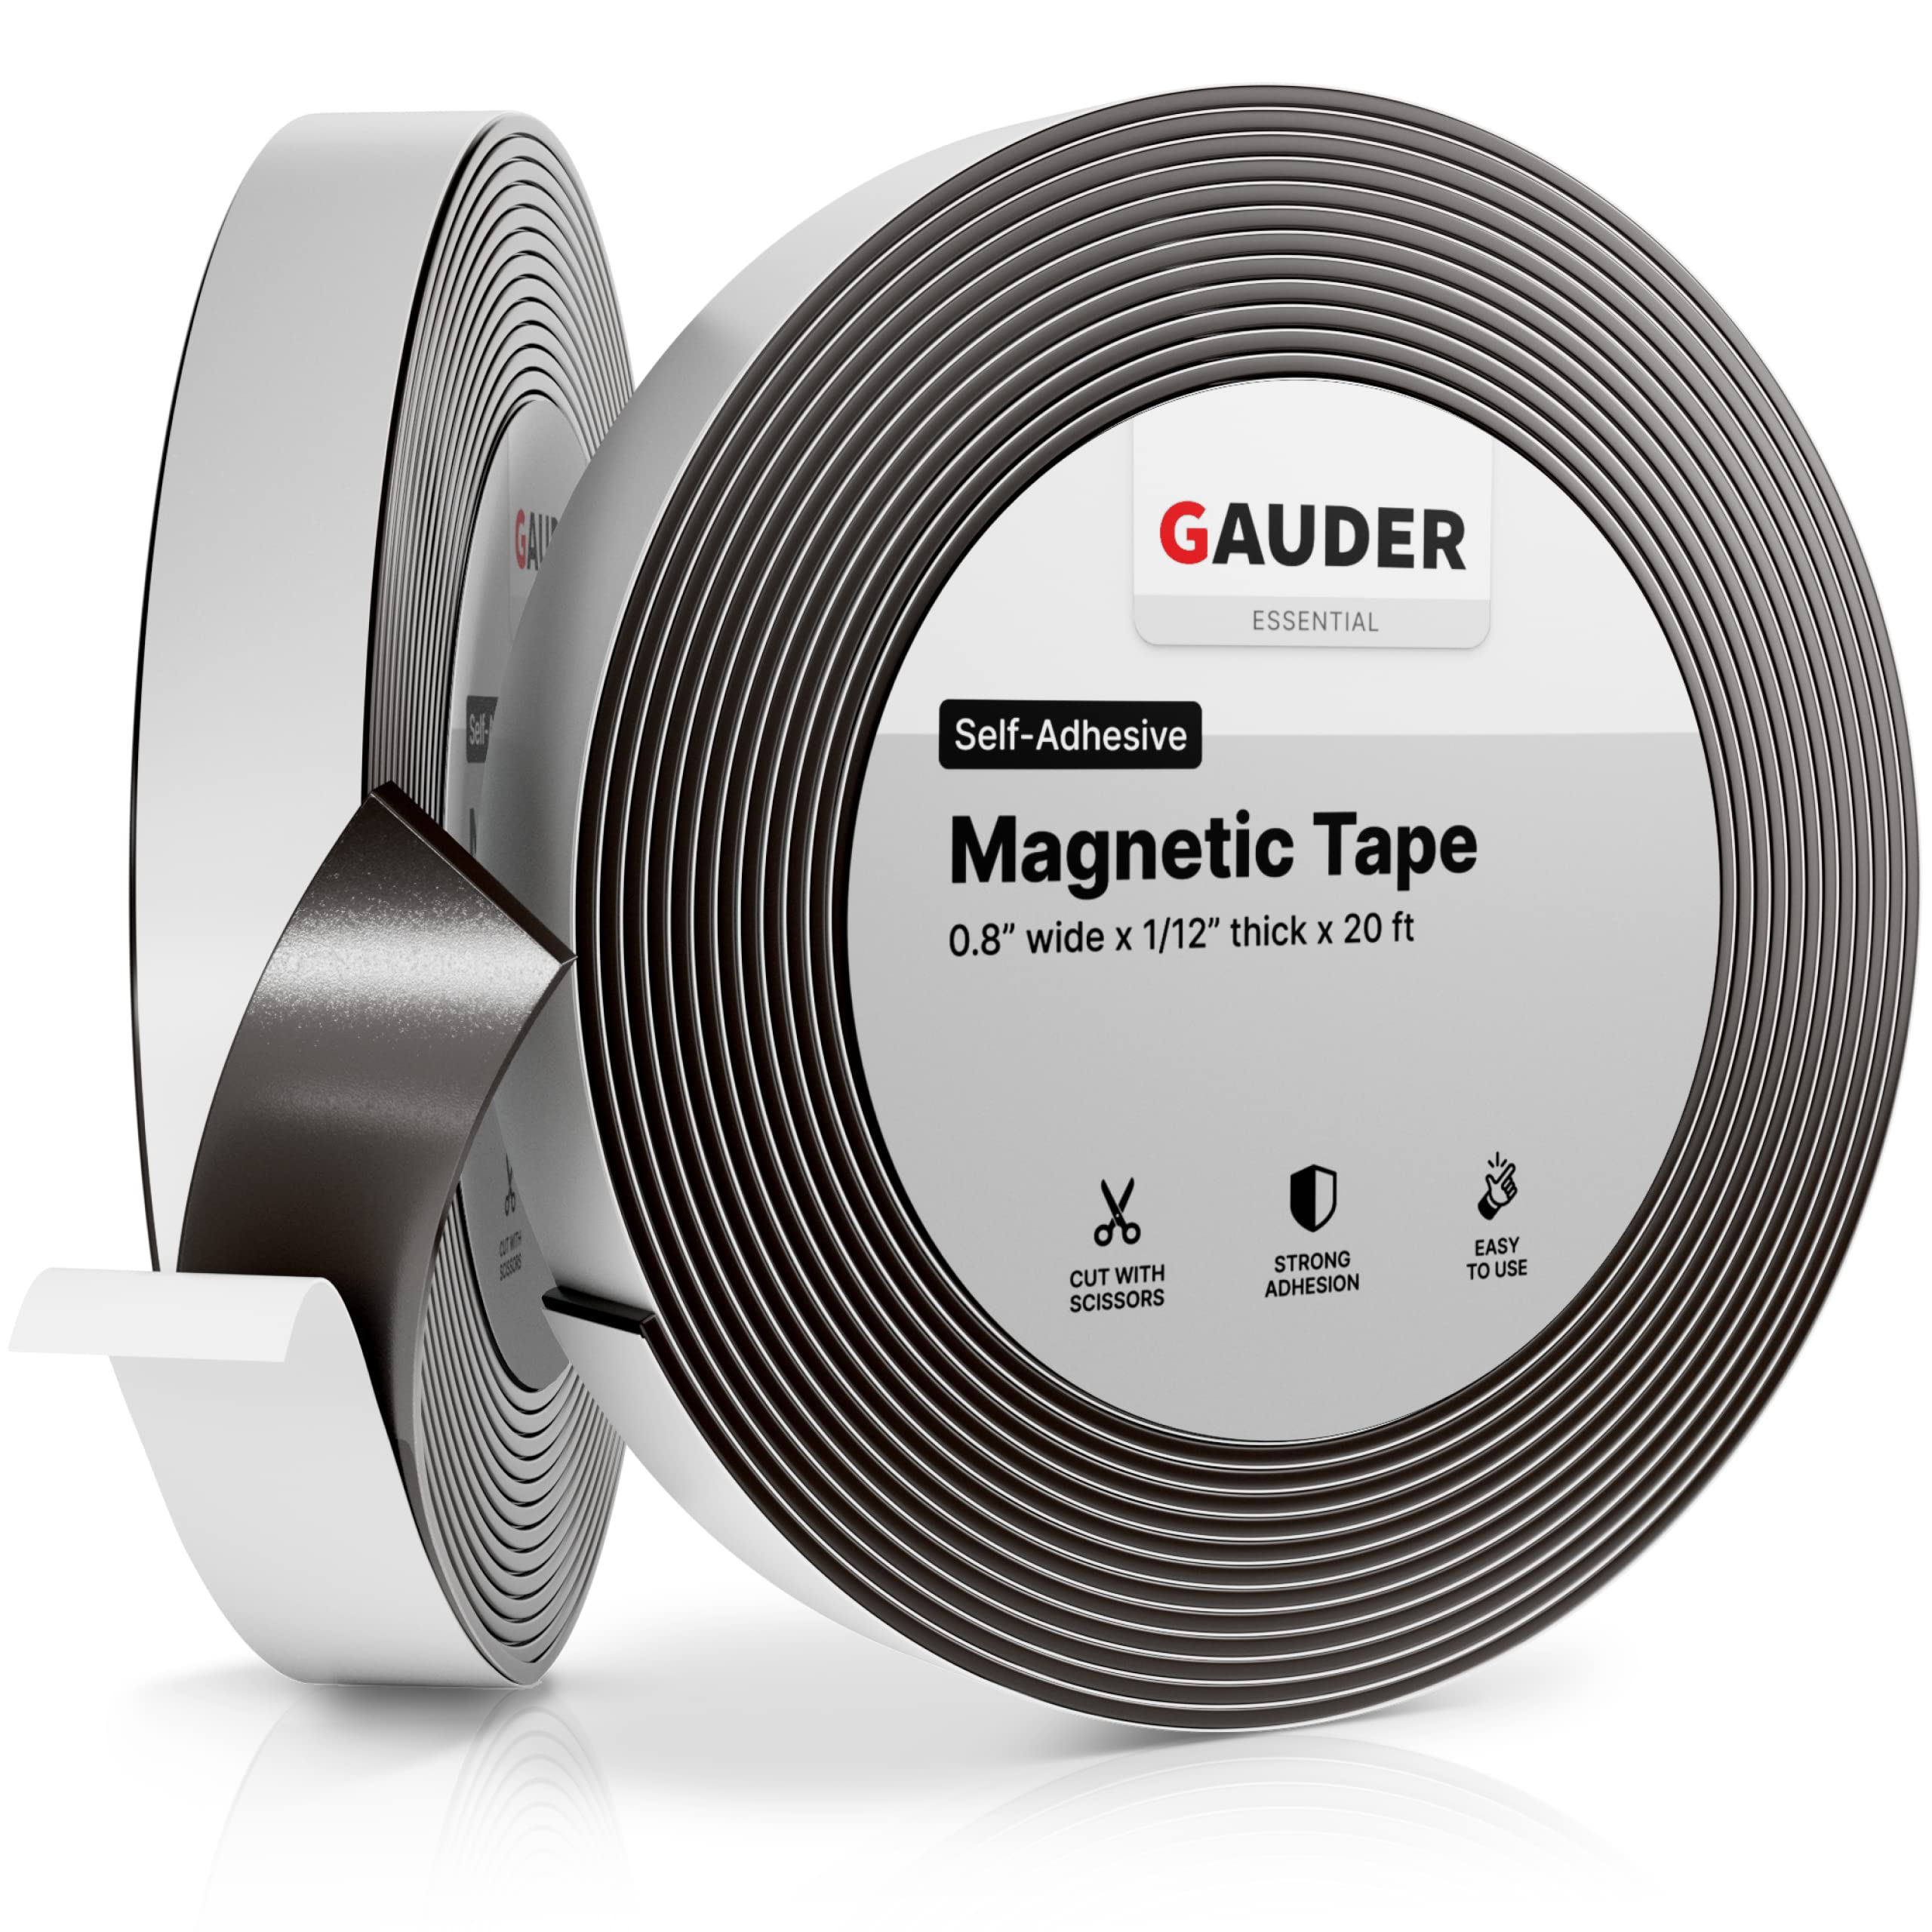 gAUDER Magnetic Tape Self Adhesive (08 Inch x 20 Feet) Magnetic Strips with Adhesive Backing Magnet Roll